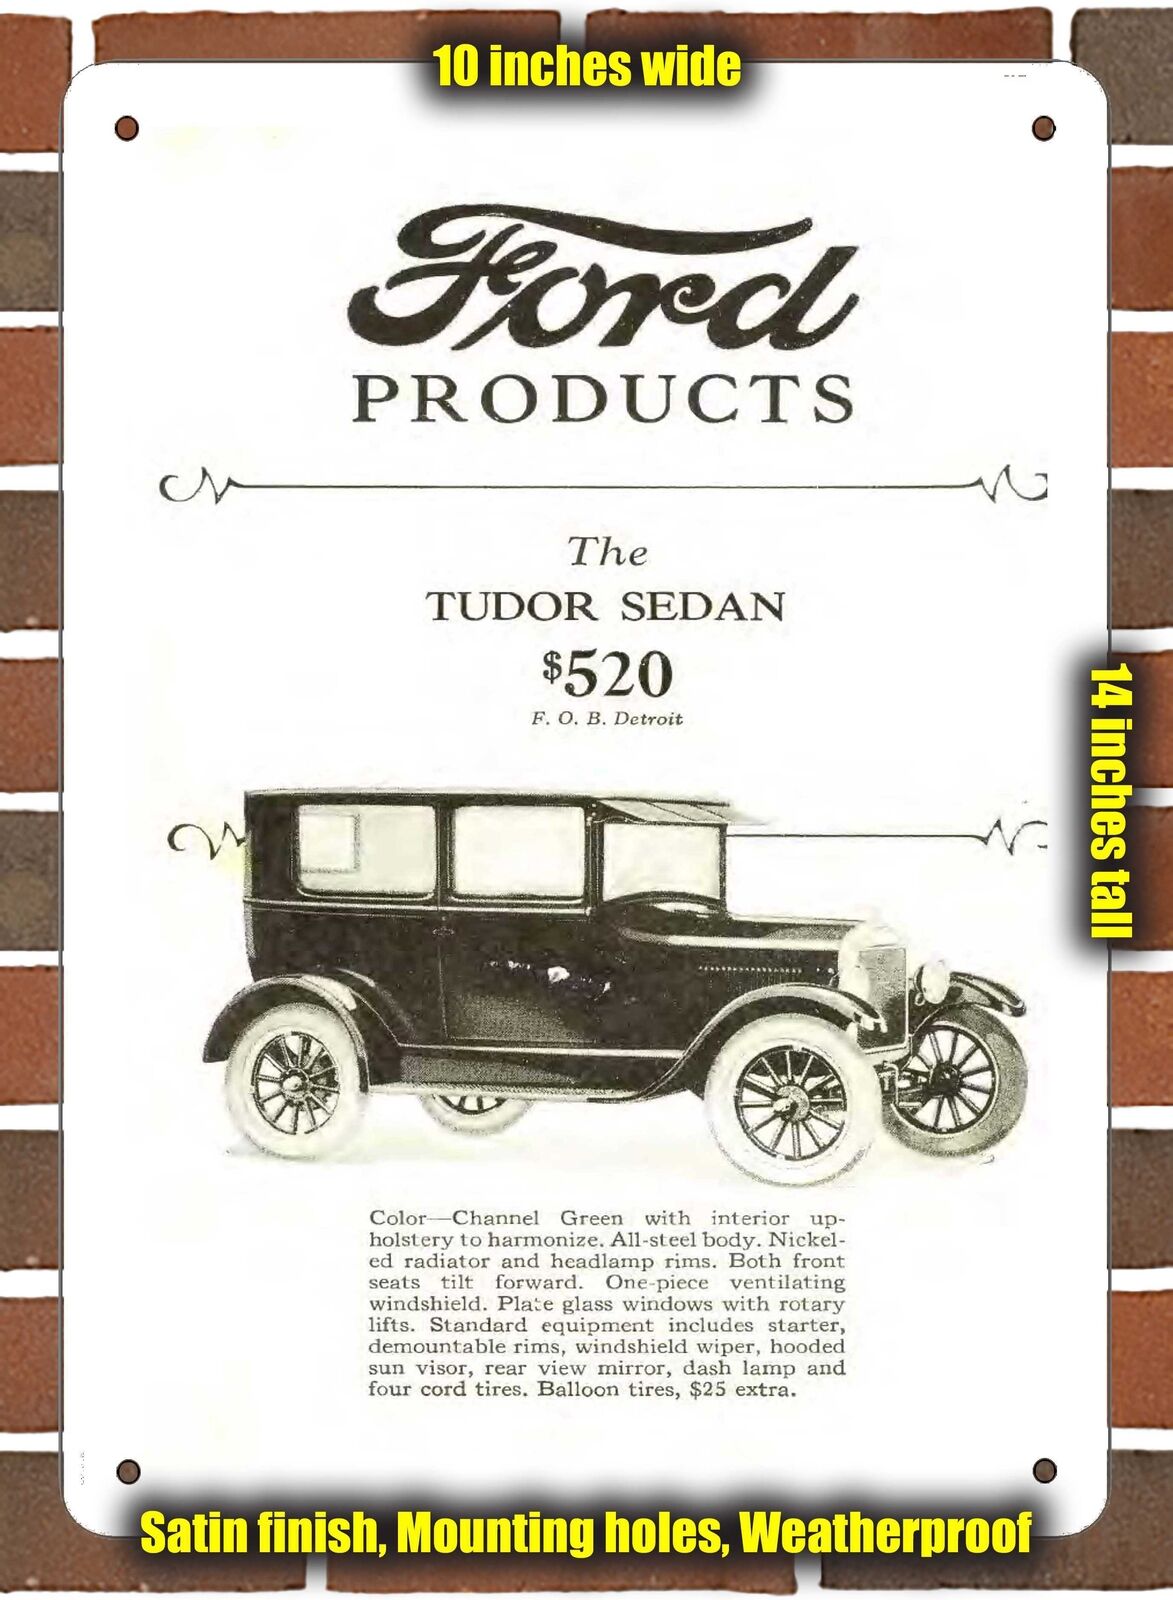 METAL SIGN - 1926 Ford Products